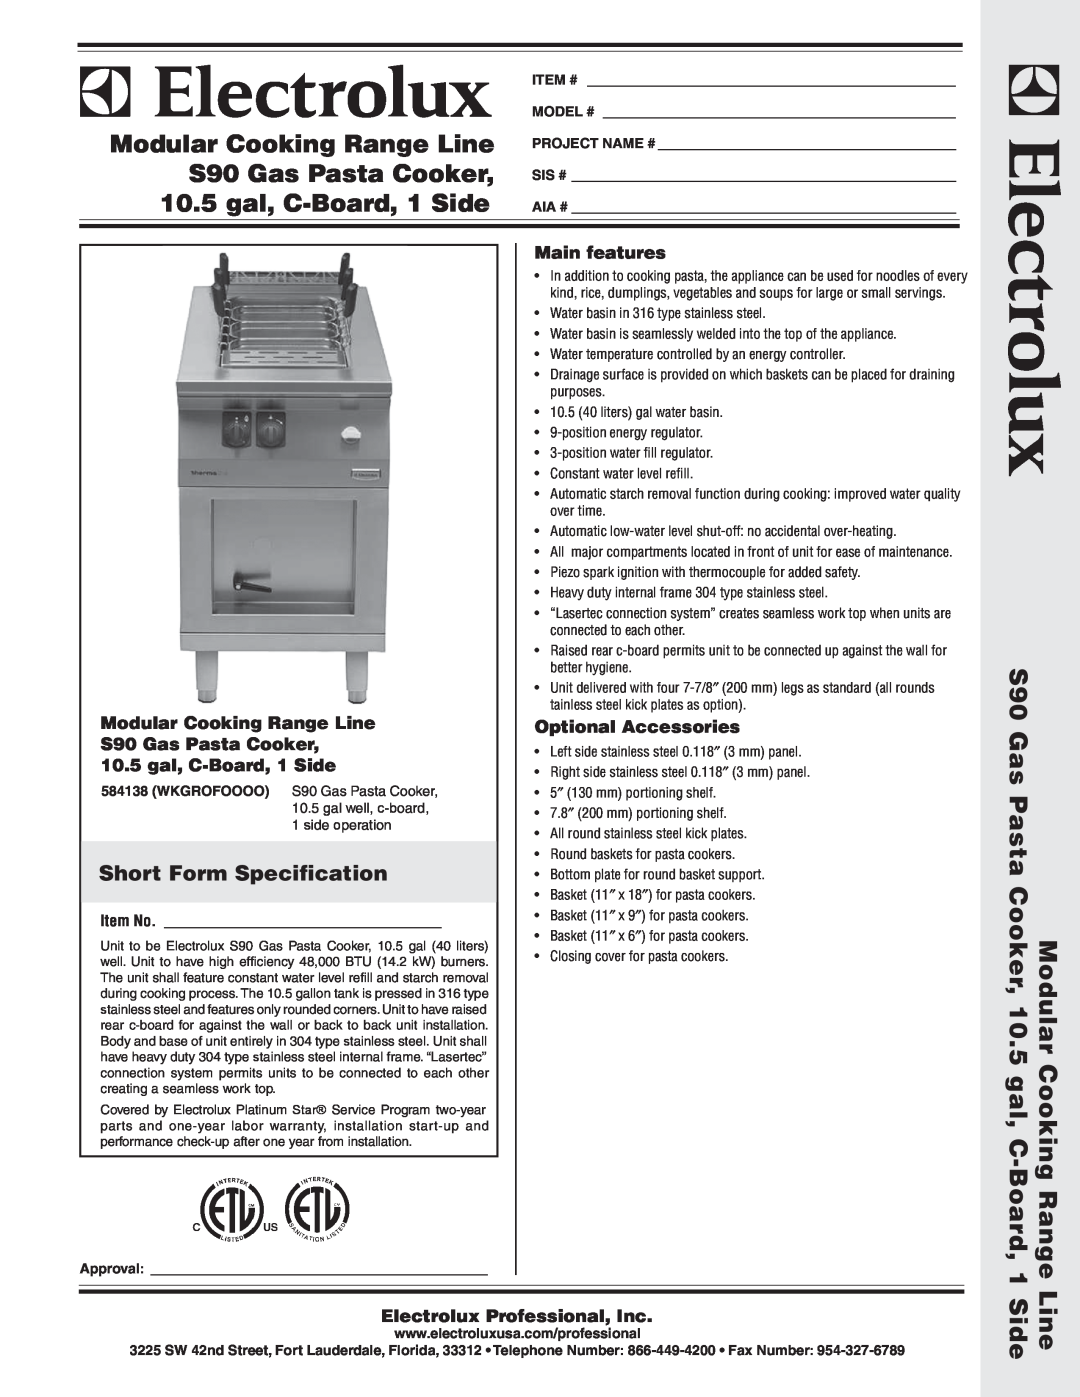 Electrolux 584138 warranty Short Form Specification, Main features, Modular Cooking Range Line, Optional Accessories 